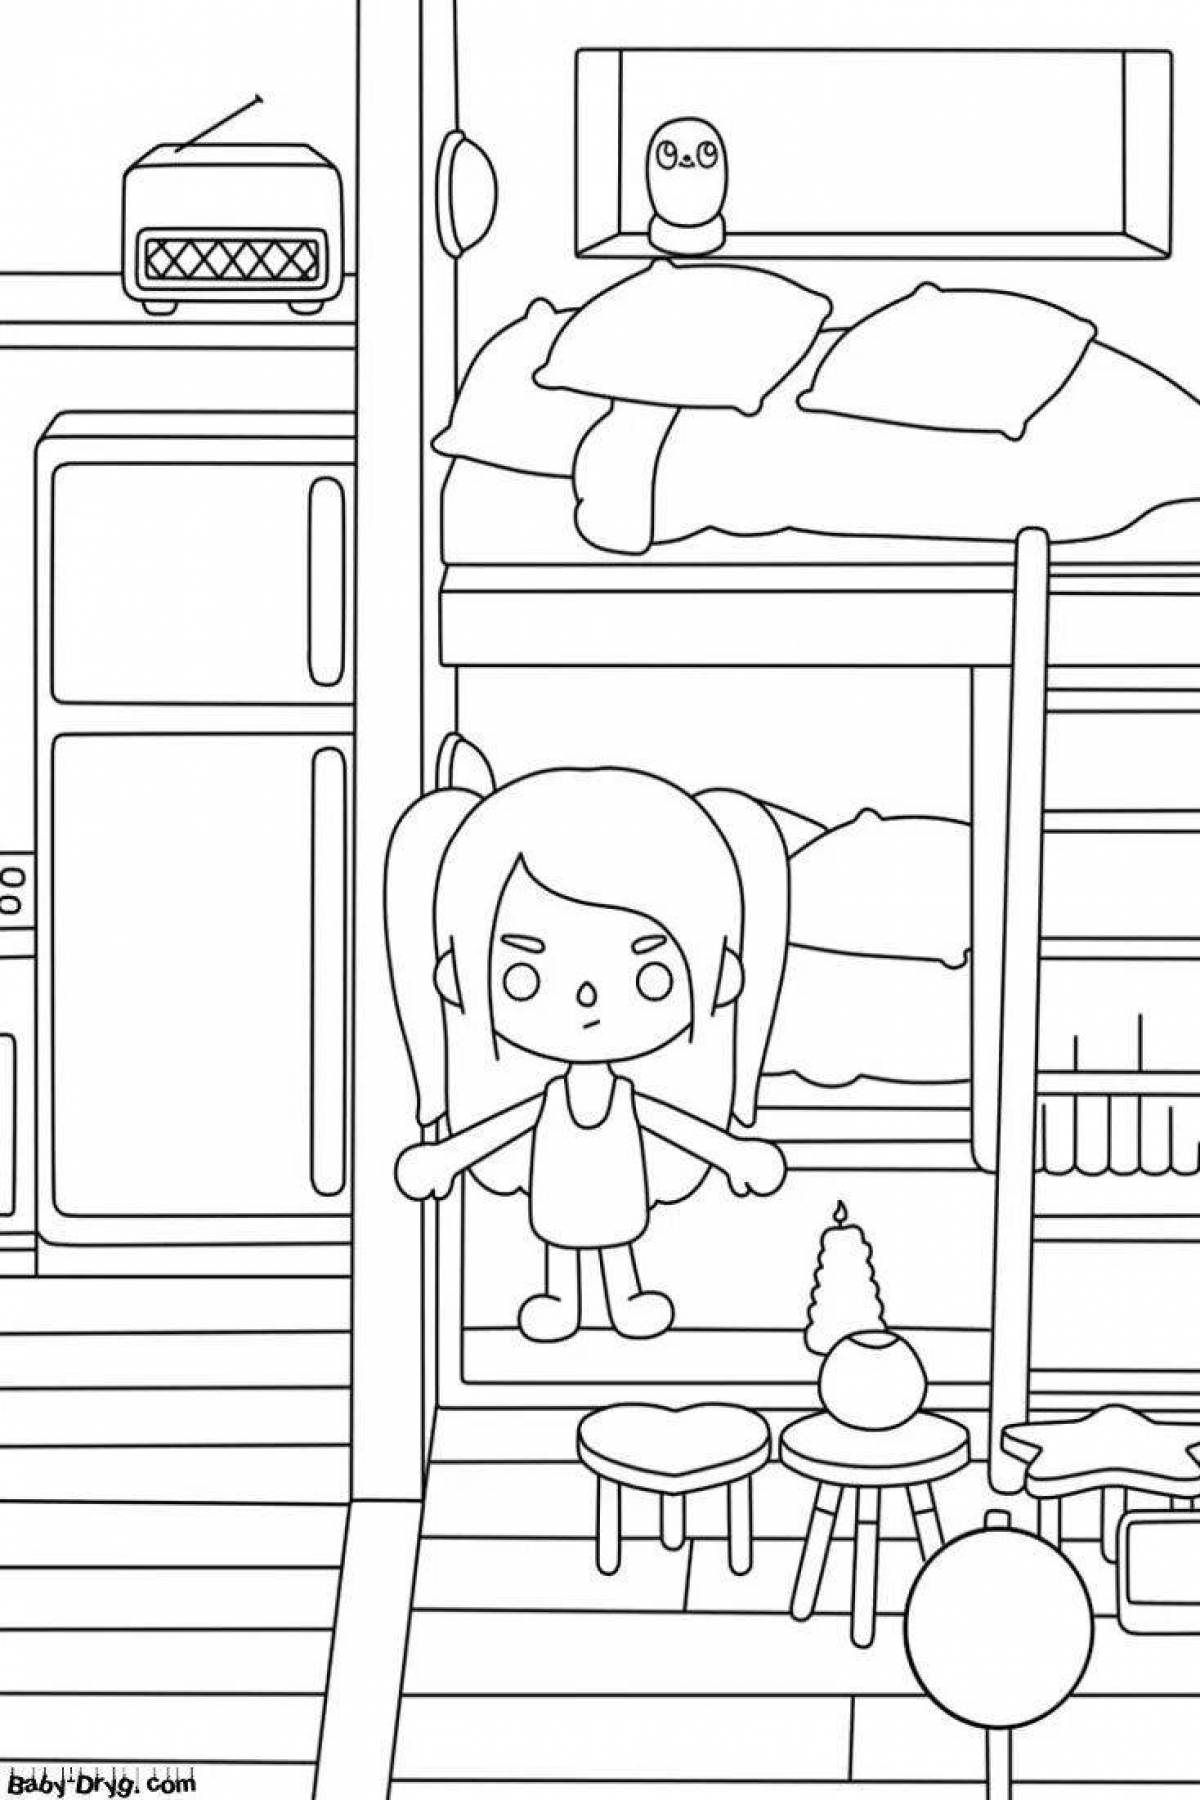 Majestic current side interior coloring page